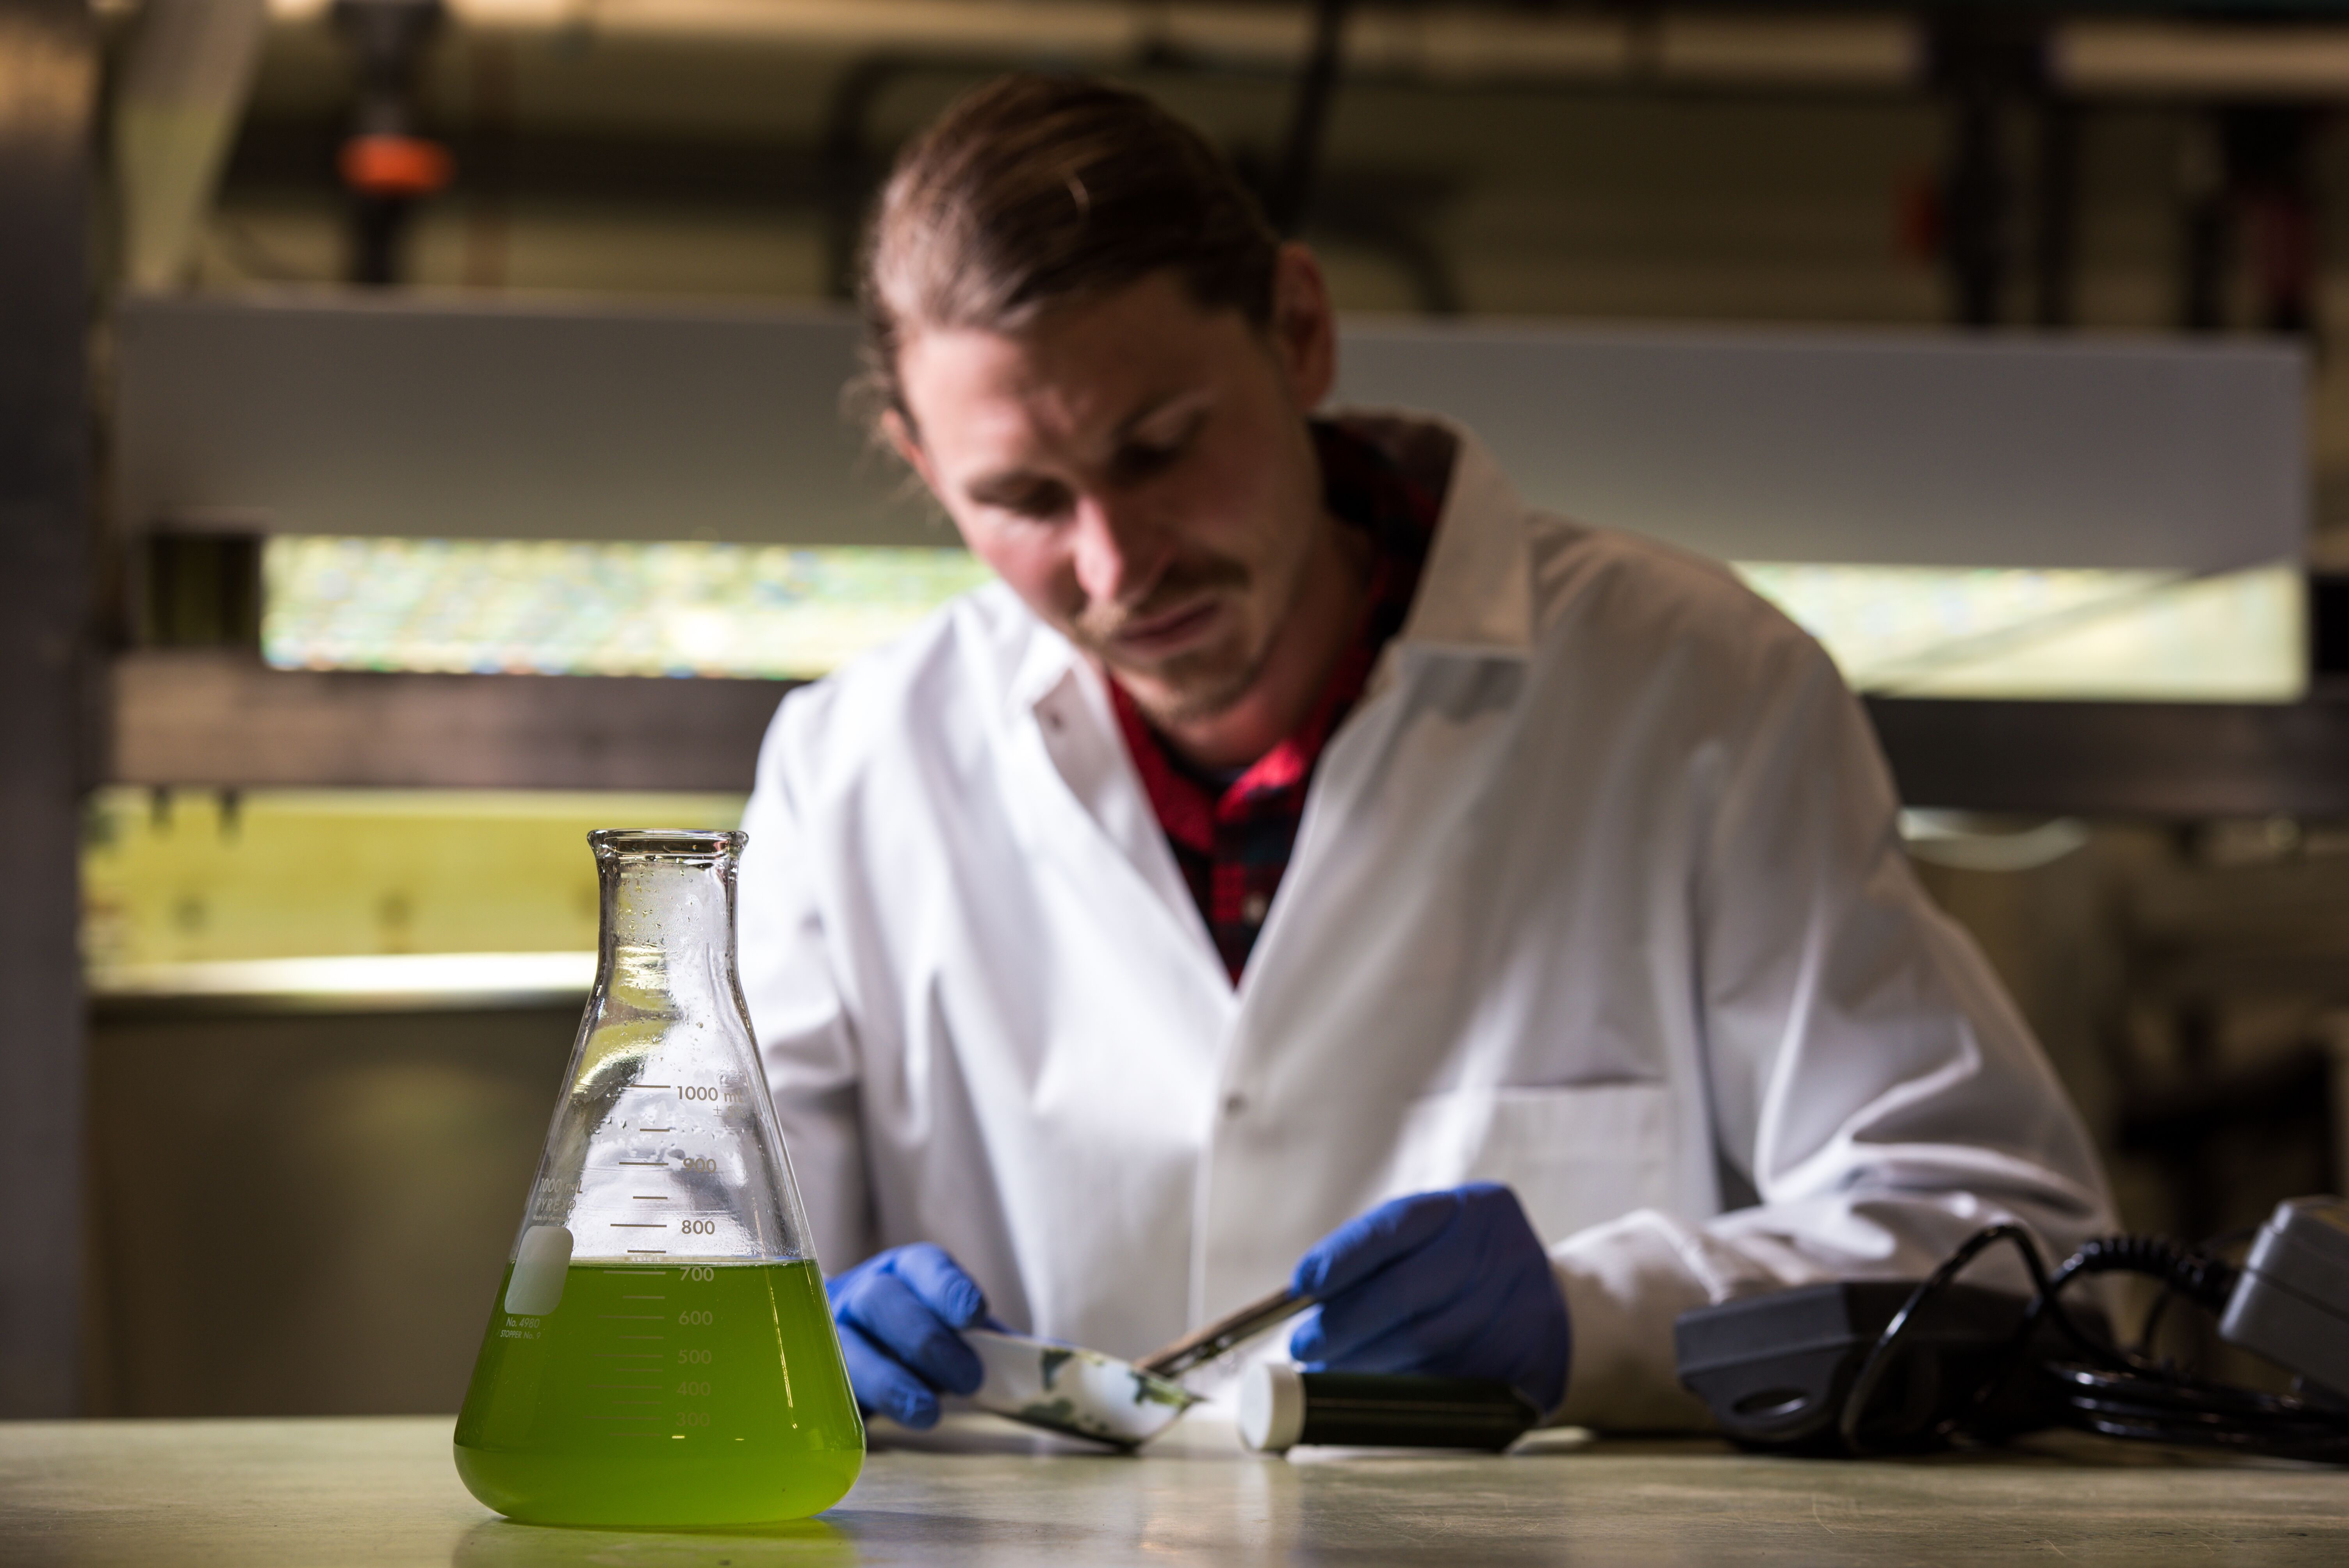 A researcher examines a tray of algae. A beaker full of green liquid sits in the foregound.